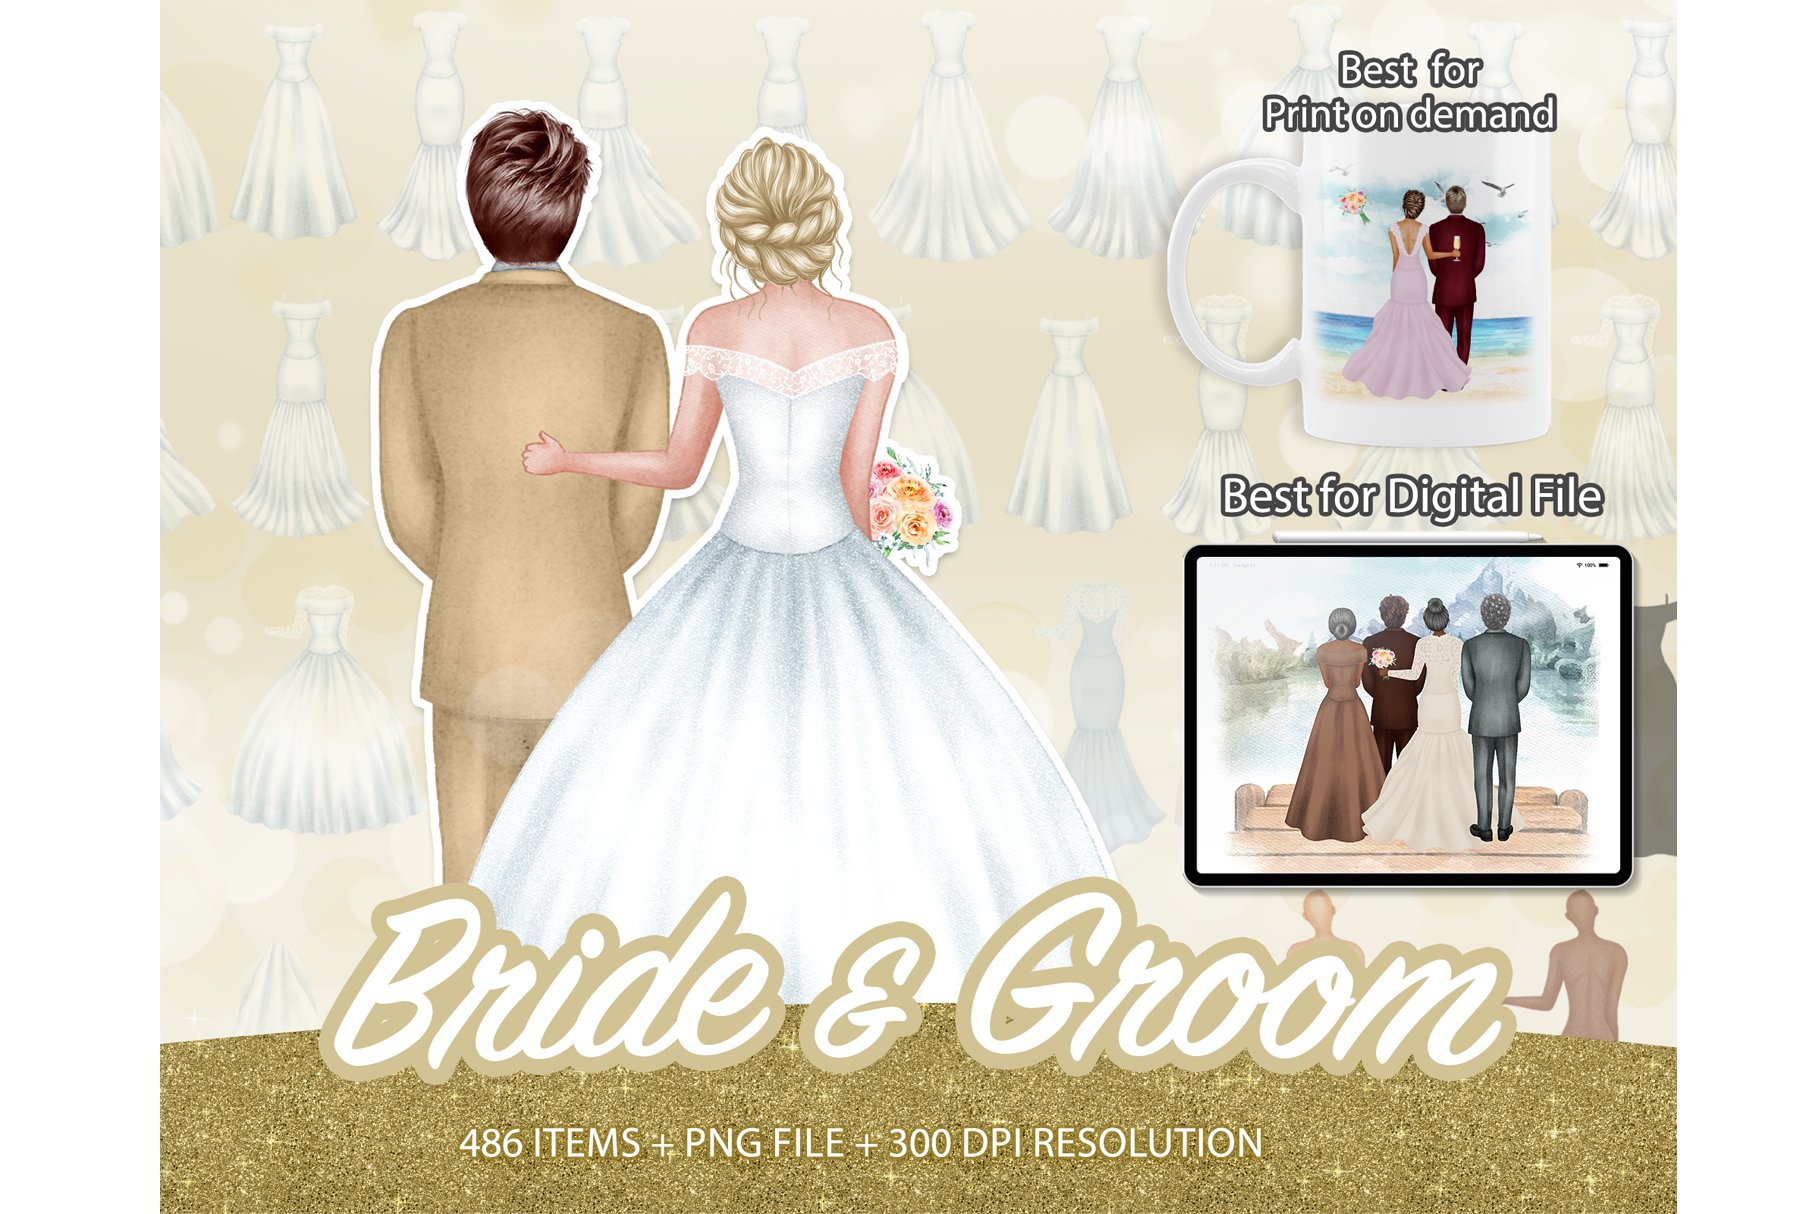 Bride &Groom Wedding Day Clipart PNG cover image.